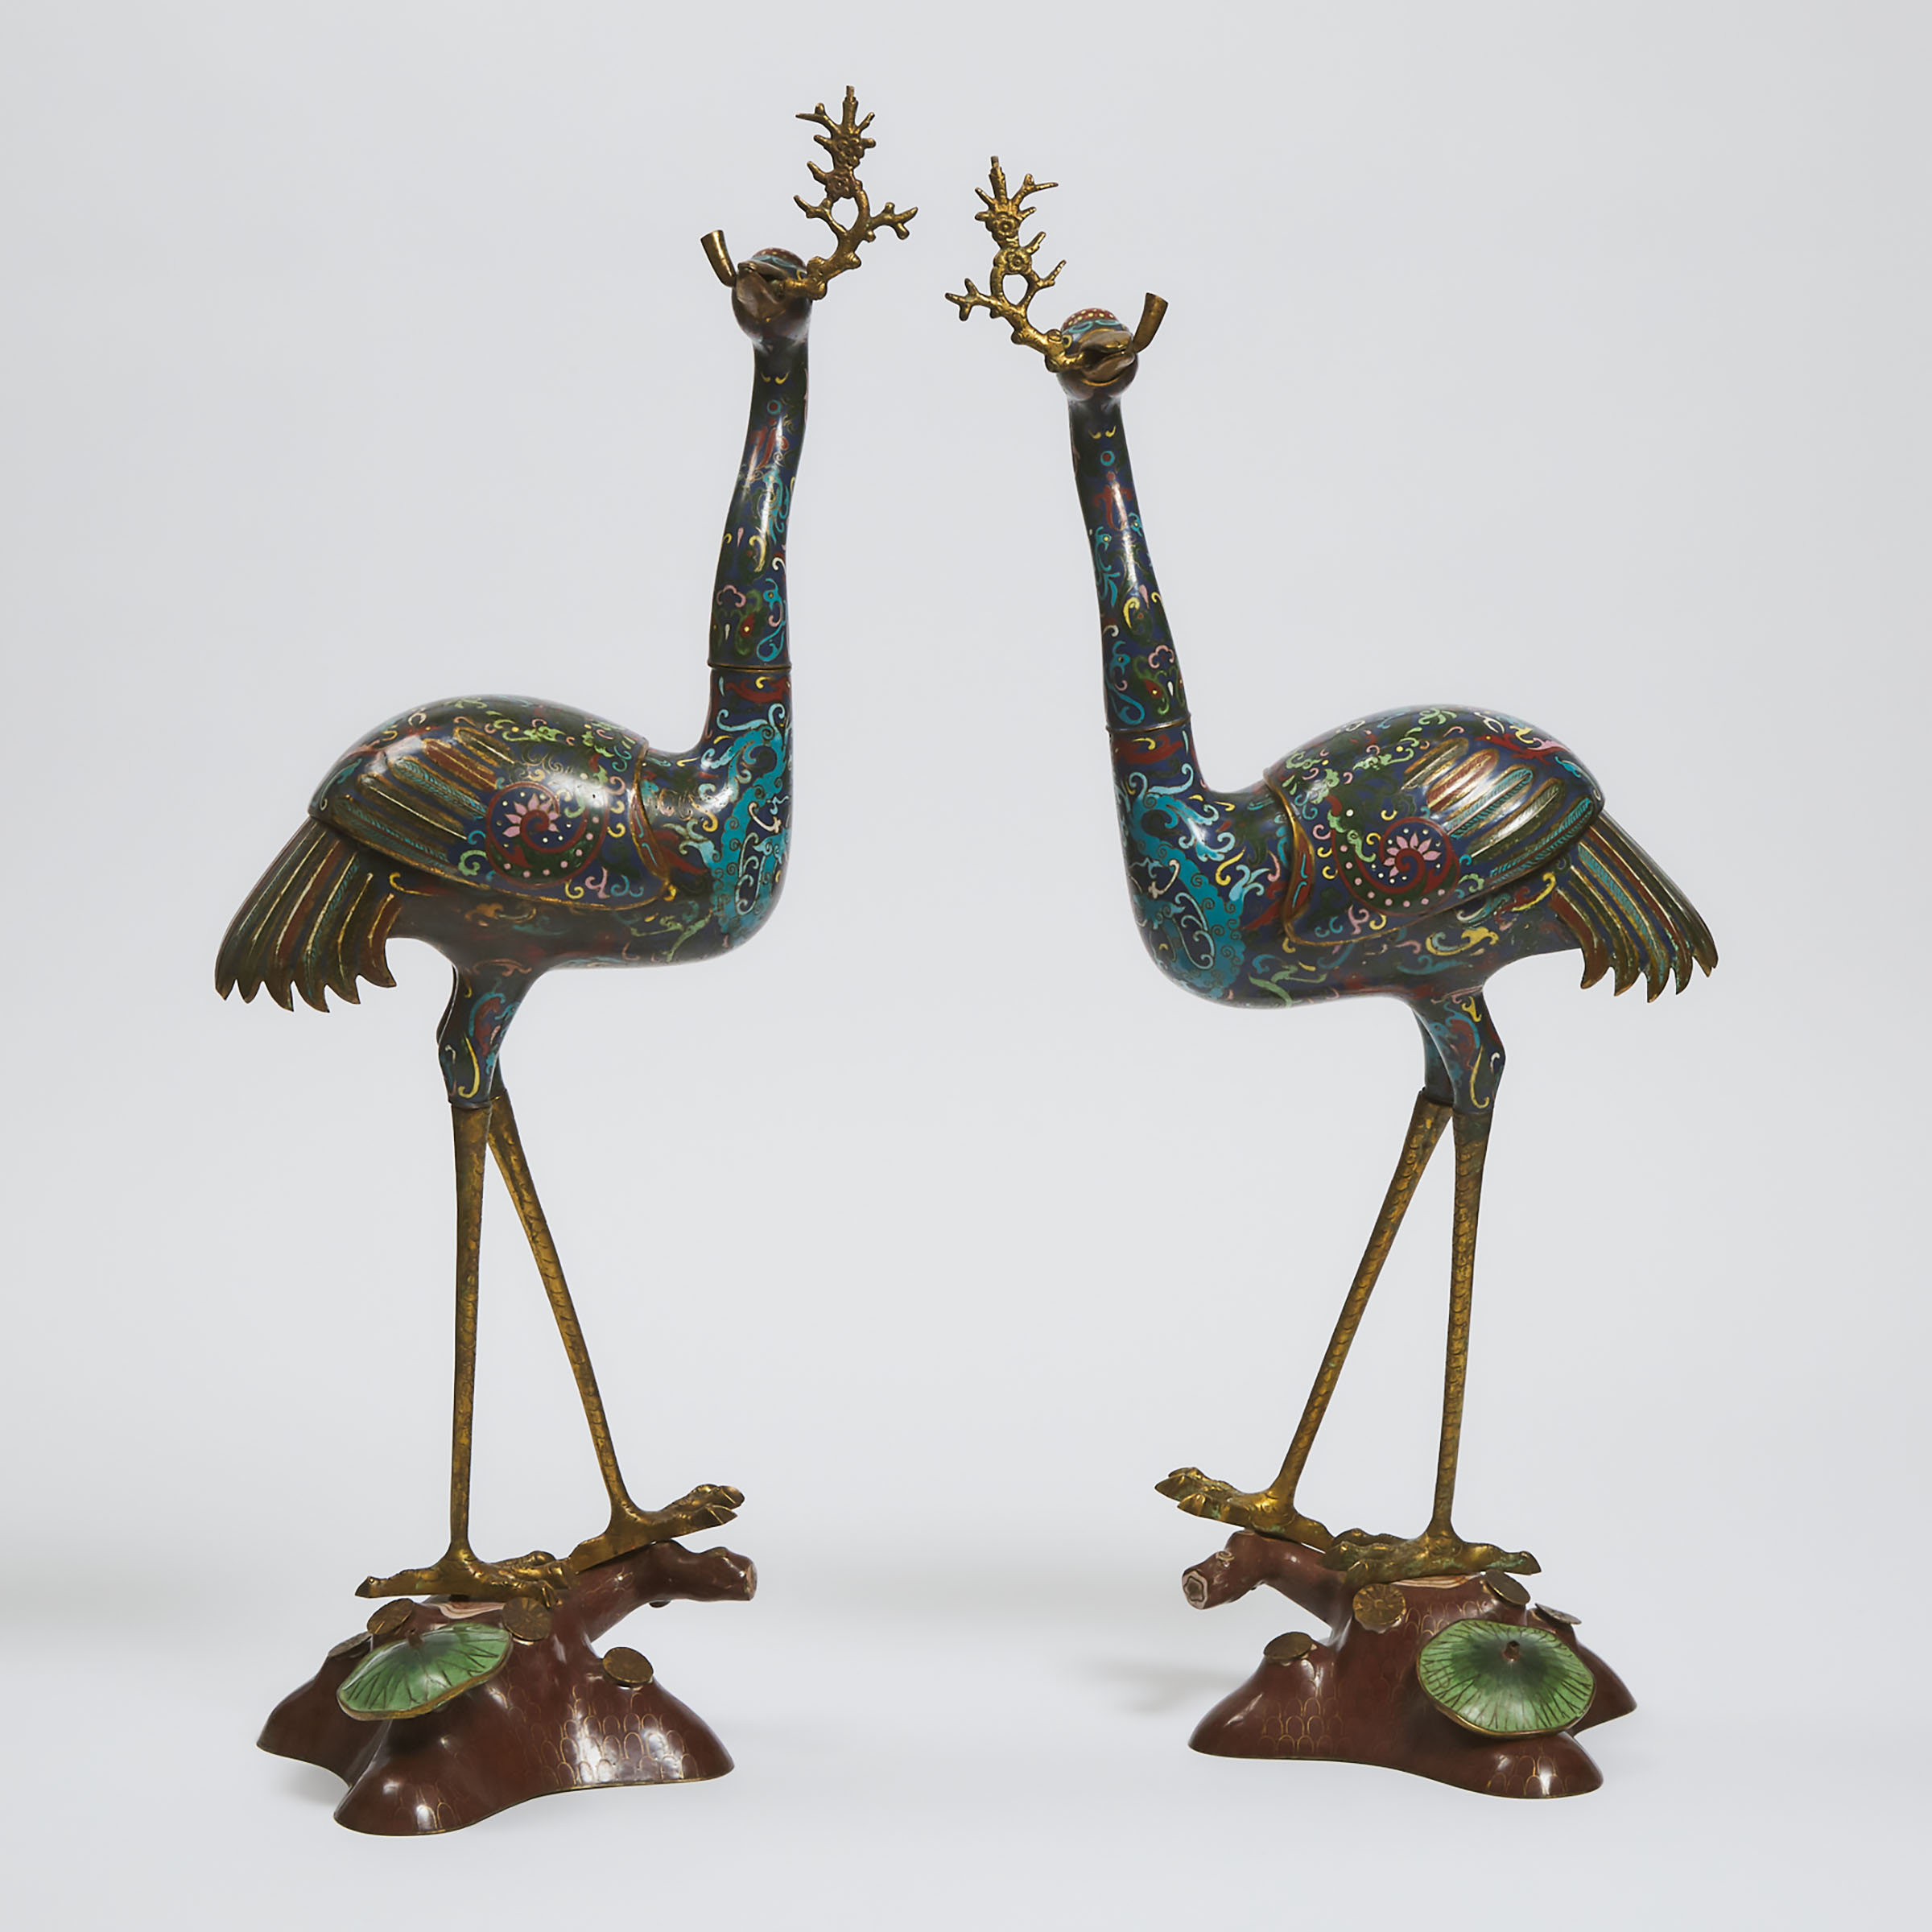 A Pair of Chinese Cloisonné Enamel Crane-Form Pricket Sticks, Late 19th Century